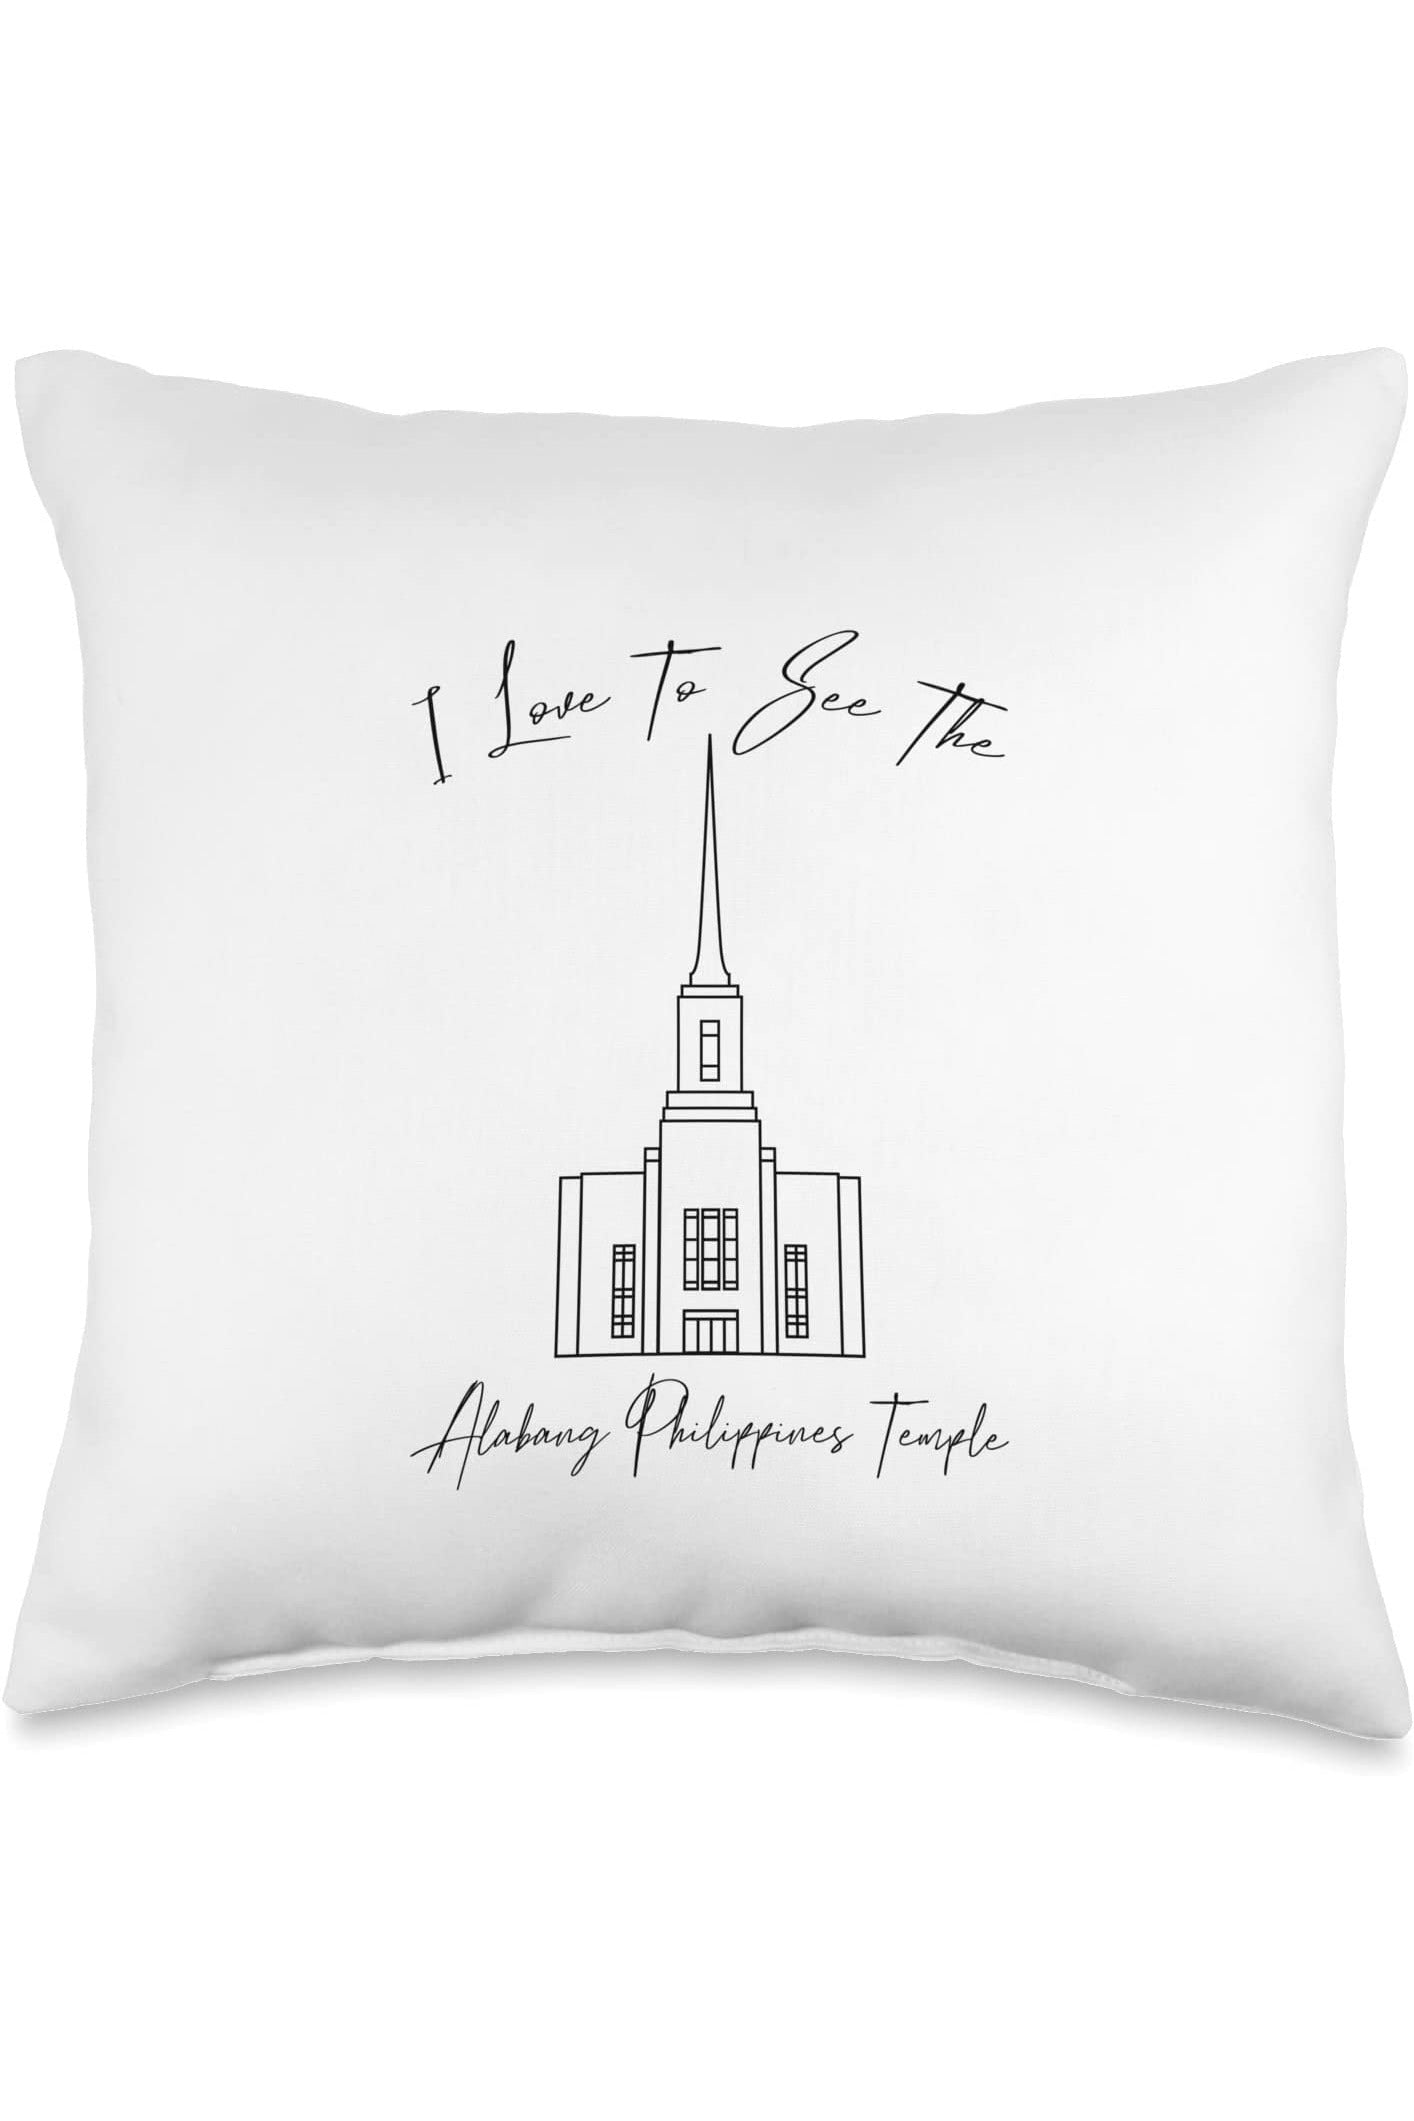 Alabang Philippines Temple Throw Pillows - Calligraphy Style (English) US